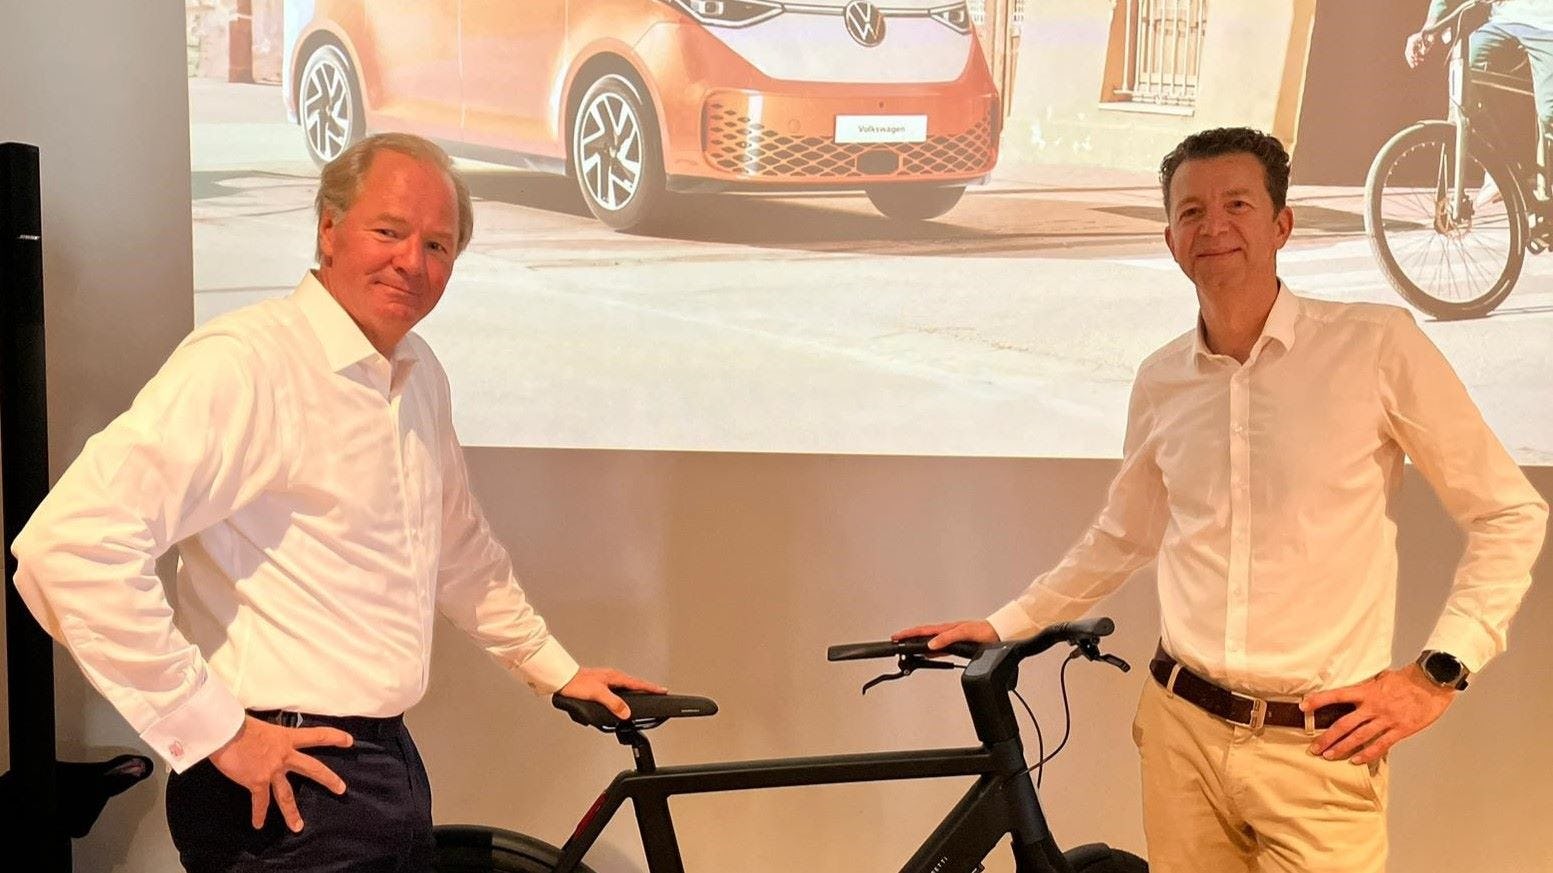 Janus Smalbraak, CEO of Pon Holdings and Dr. Christian Dahlheim, Chairman of the Board of Management of Volkswagen Financial Services were personally in Munich during the IAA to announce the partnership to the press. – Photos Bike Europe